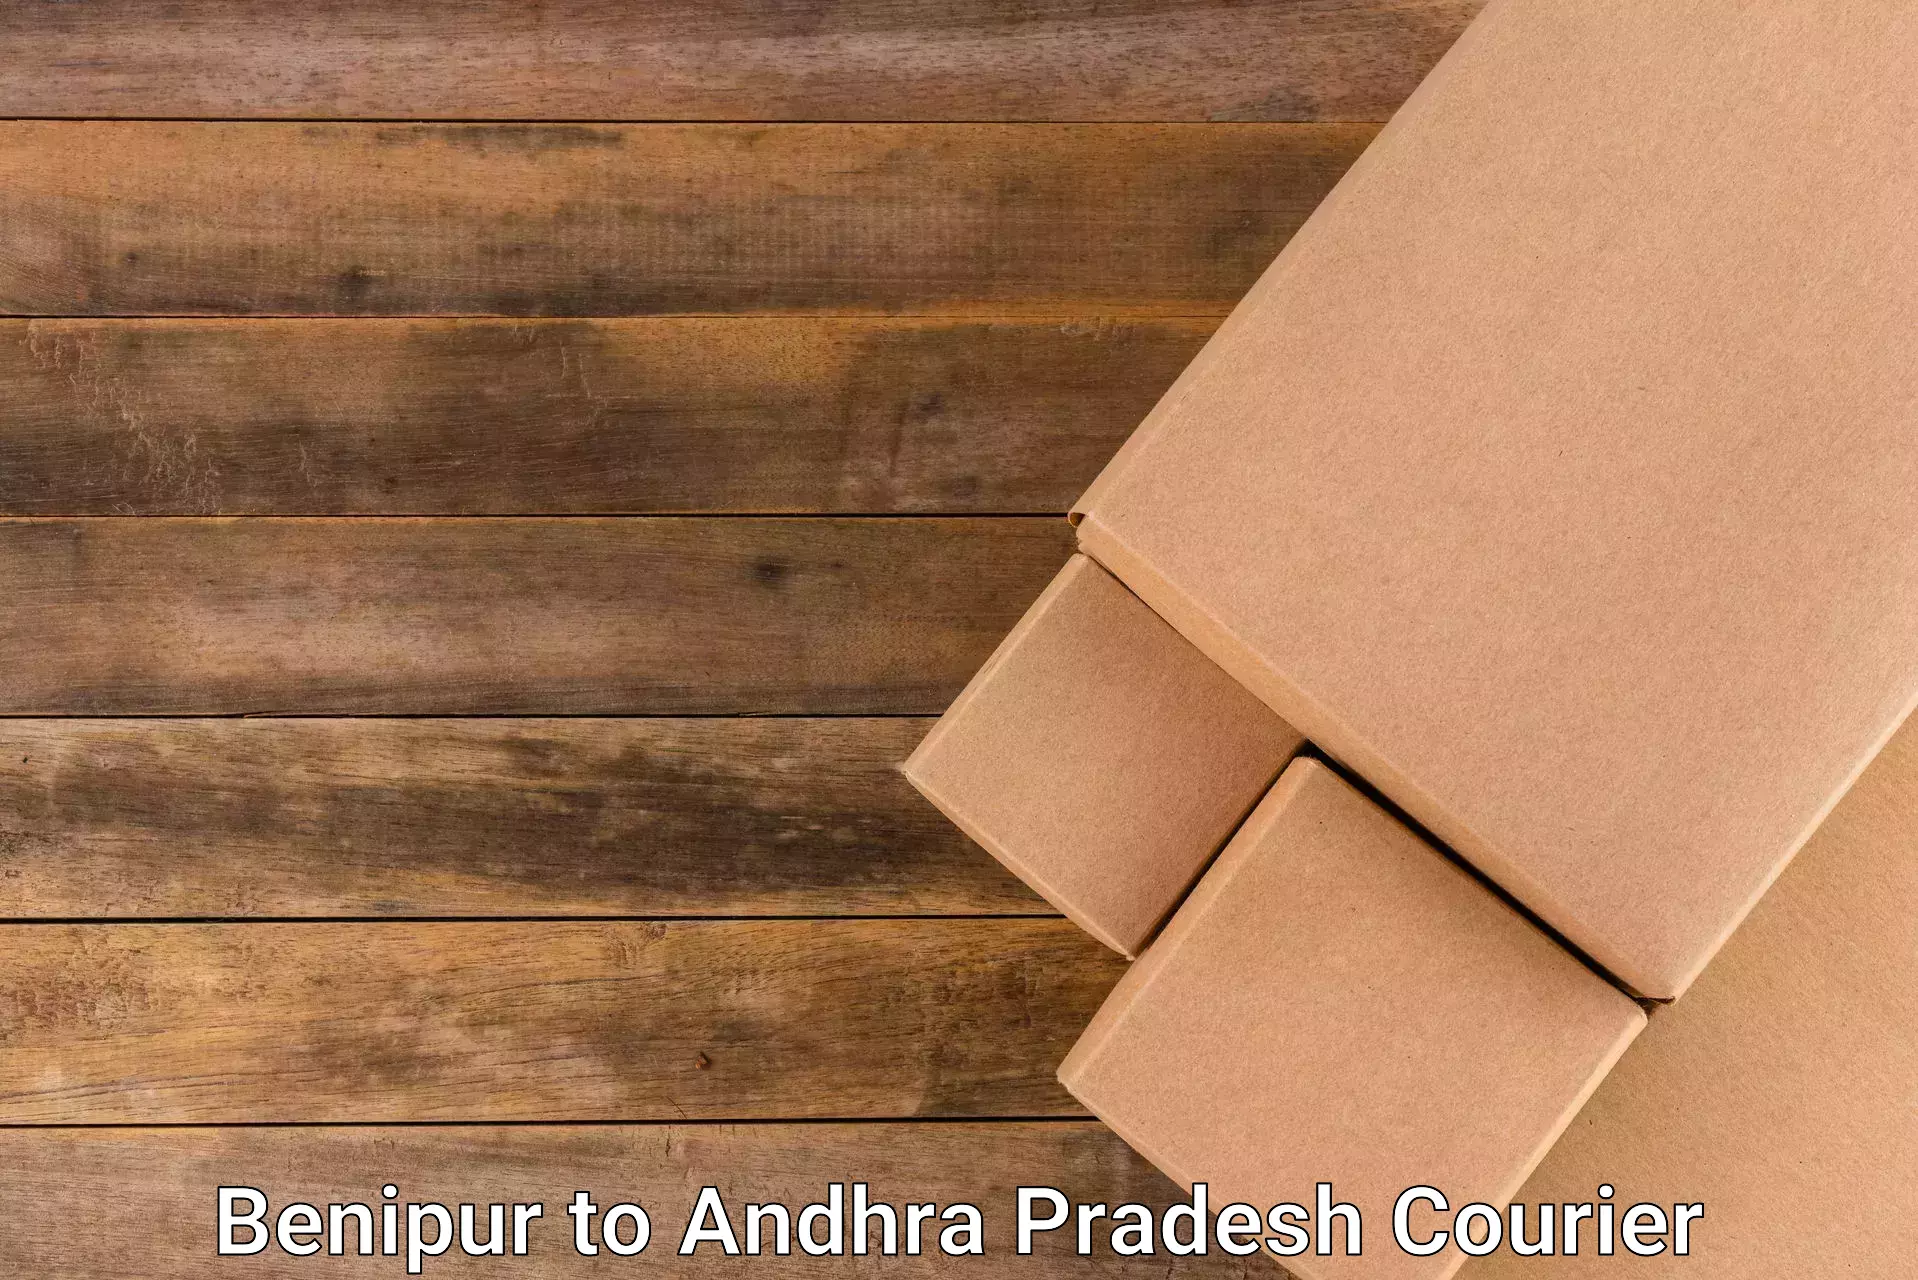 Efficient parcel tracking in Benipur to Naidupeta